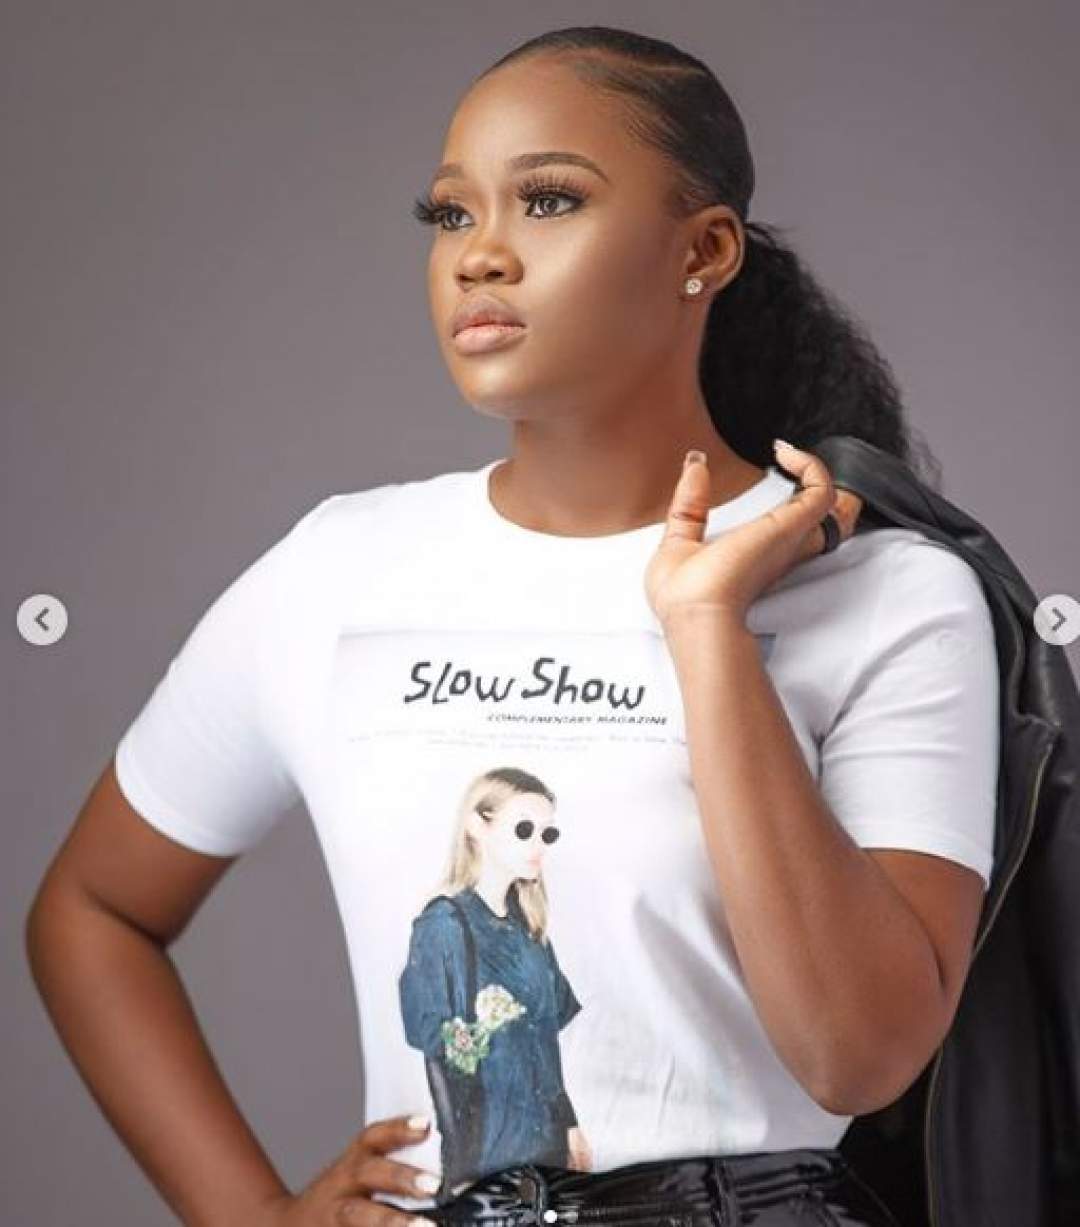 'Embrace God' - Cee-c to fans as she flaunts her hot legs in stunning new photos